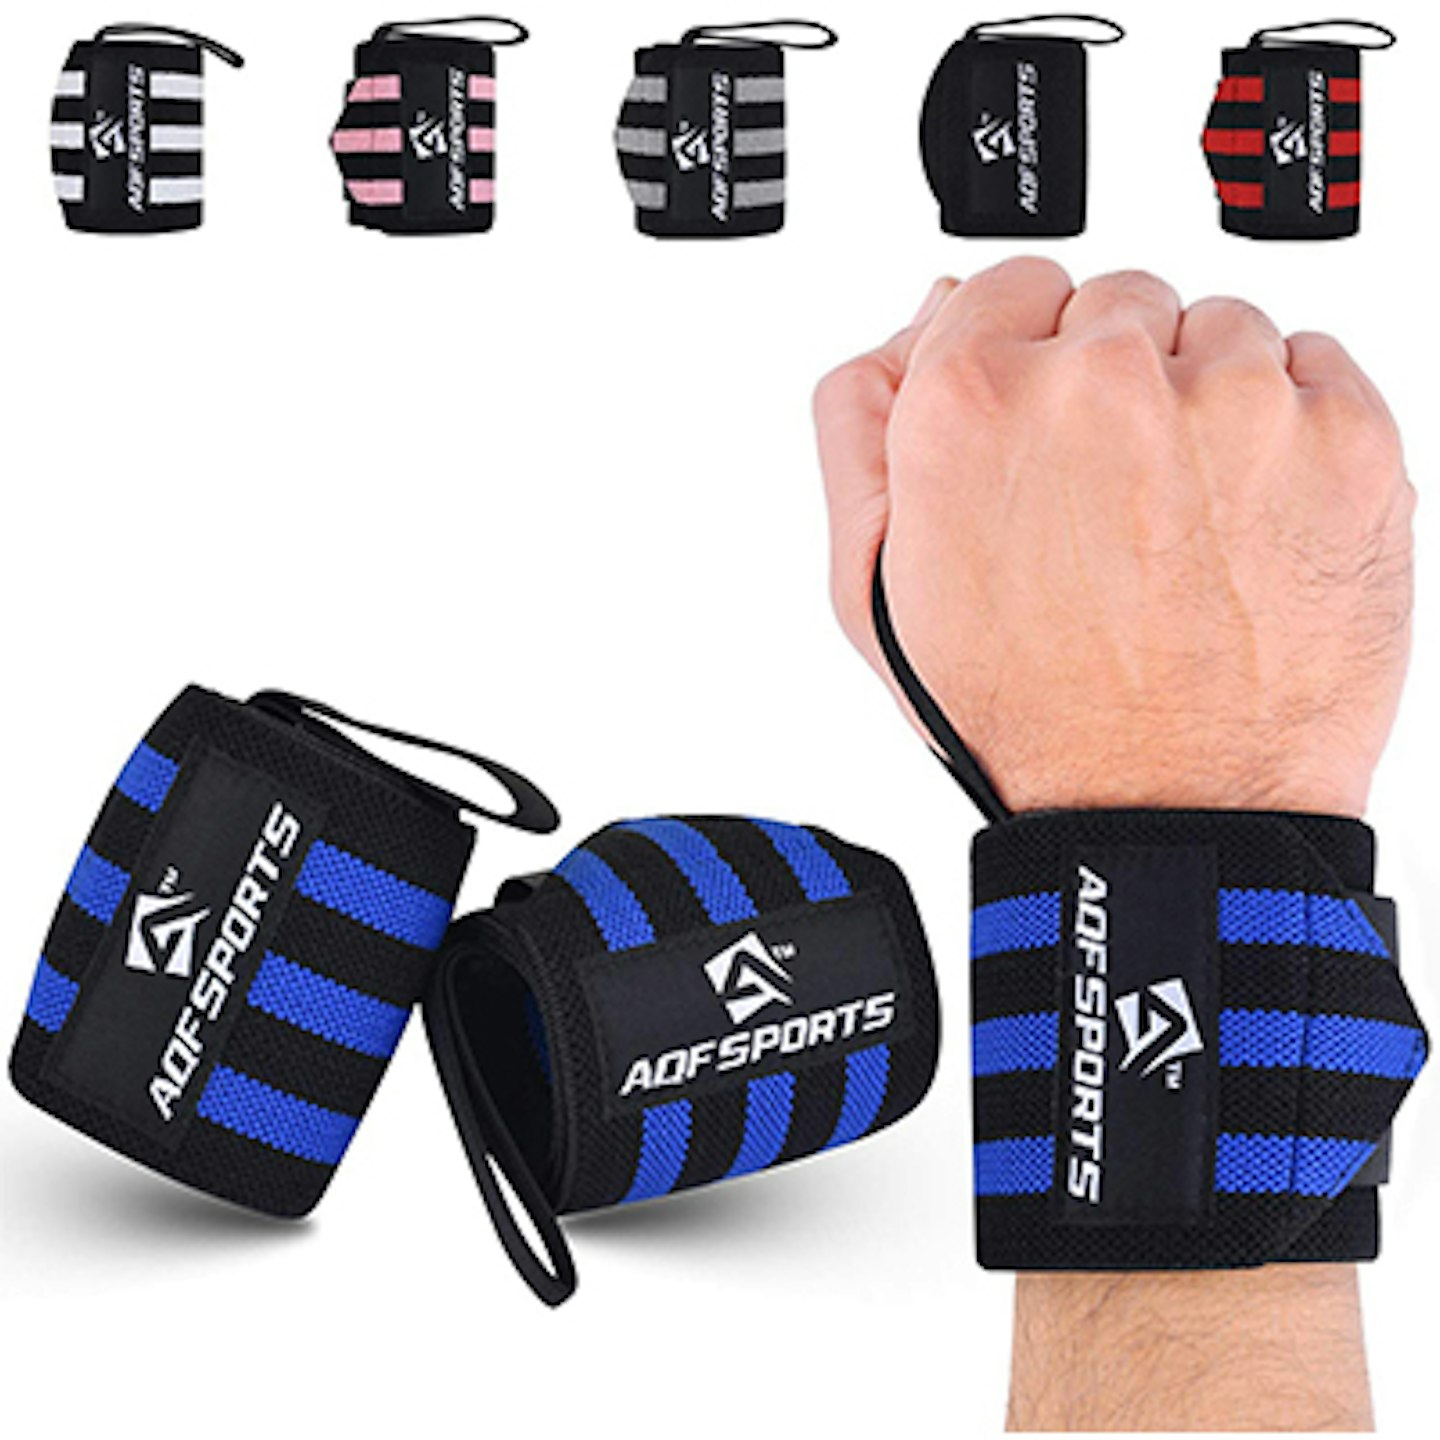 RDX Fitness Weight Lifting Straps for sale